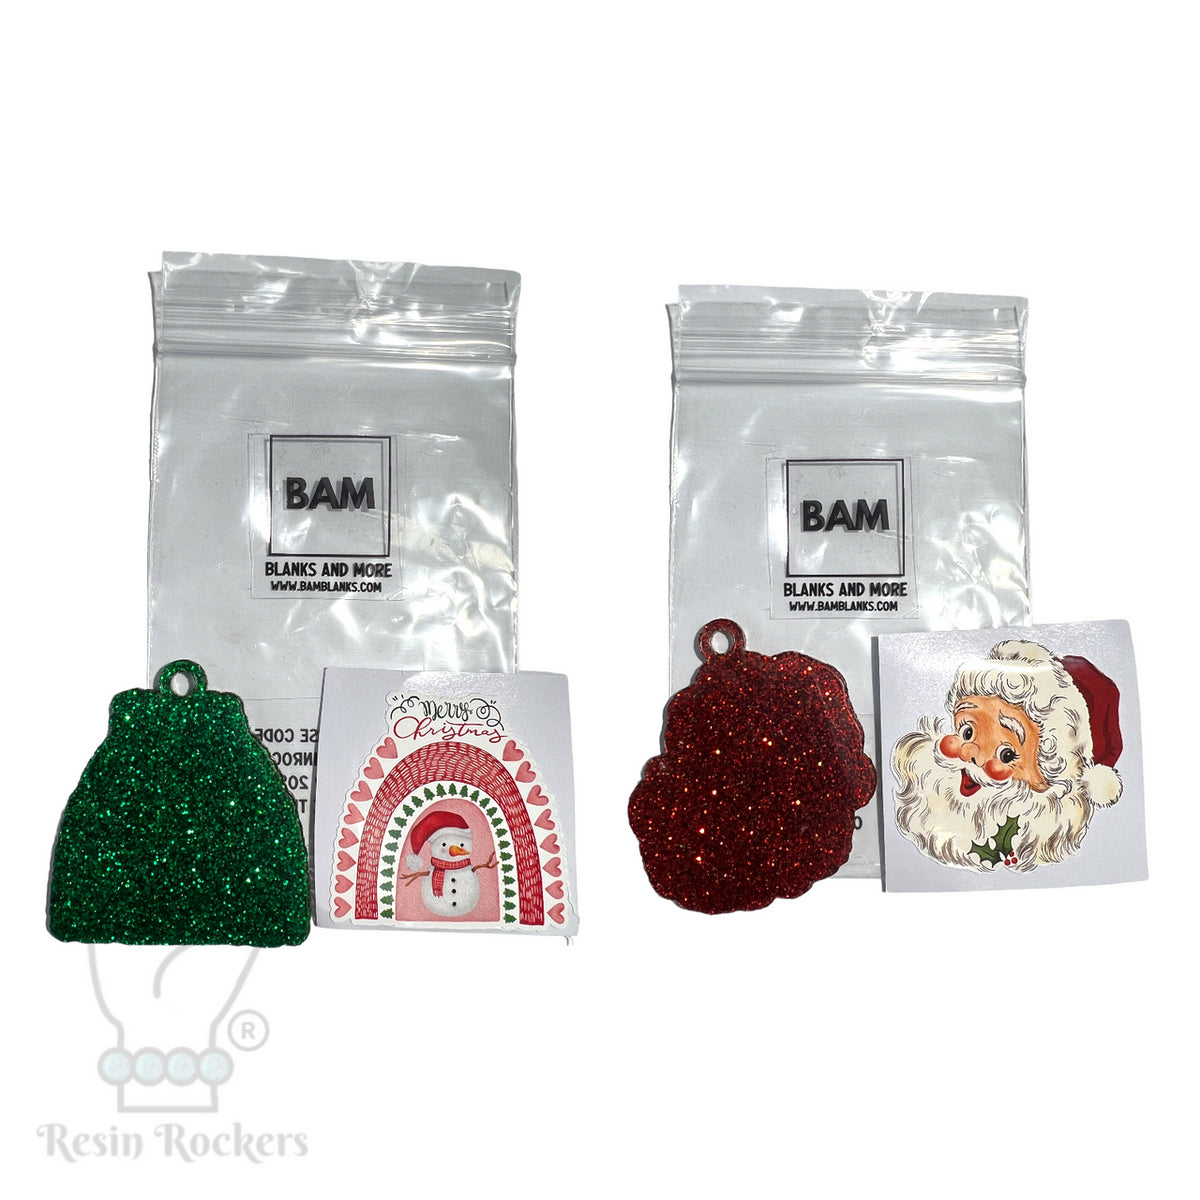 BAM BLANKS Holiday Decal and Glitter Acrylic Shape Sets - Resin Rockers